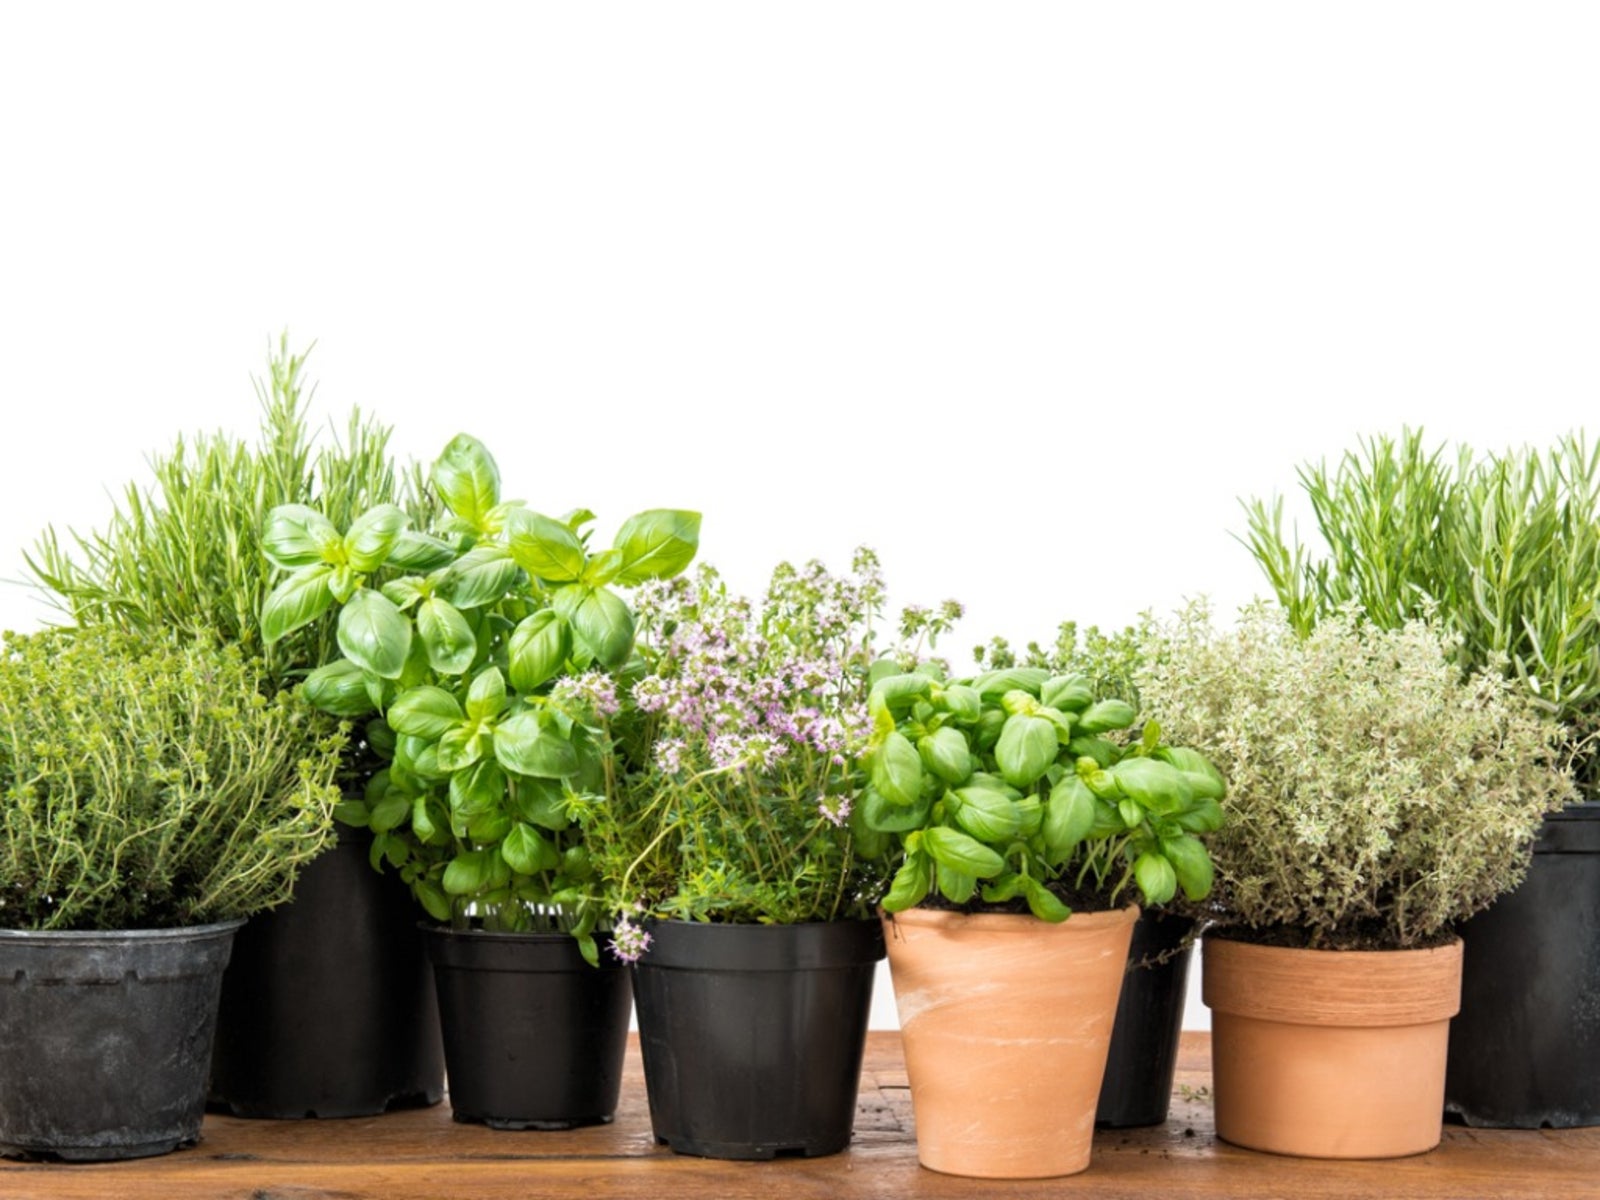 Herbs In Pots   Tips For Container Gardening With Herbal Plants